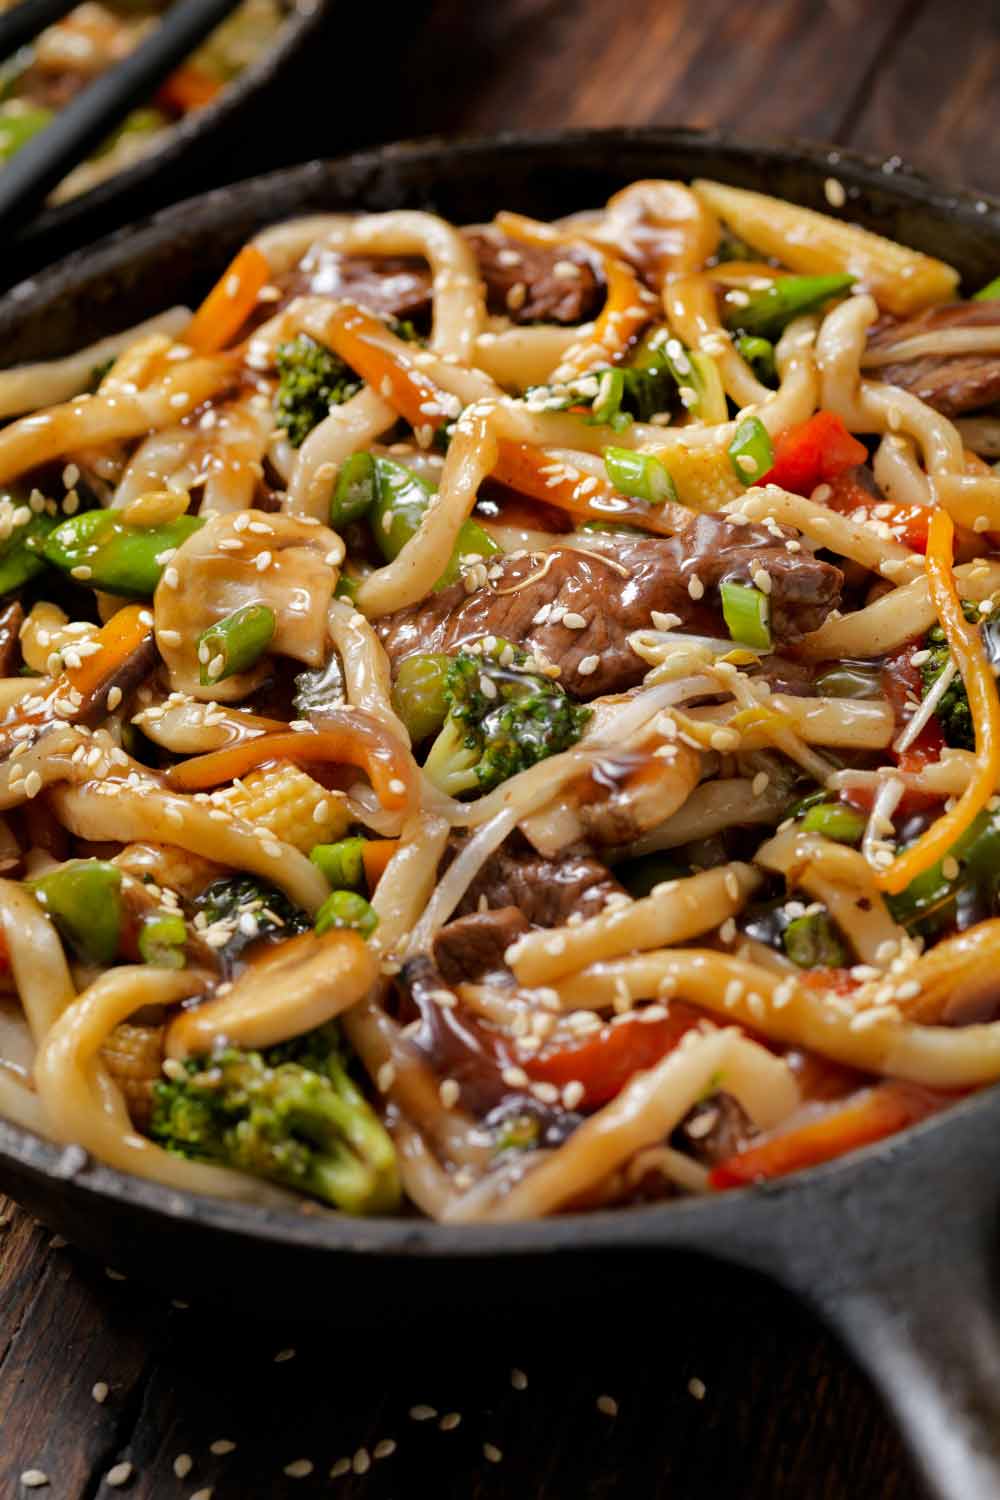 Best Beef and Broccoli Noodle Stir Fry Recipe